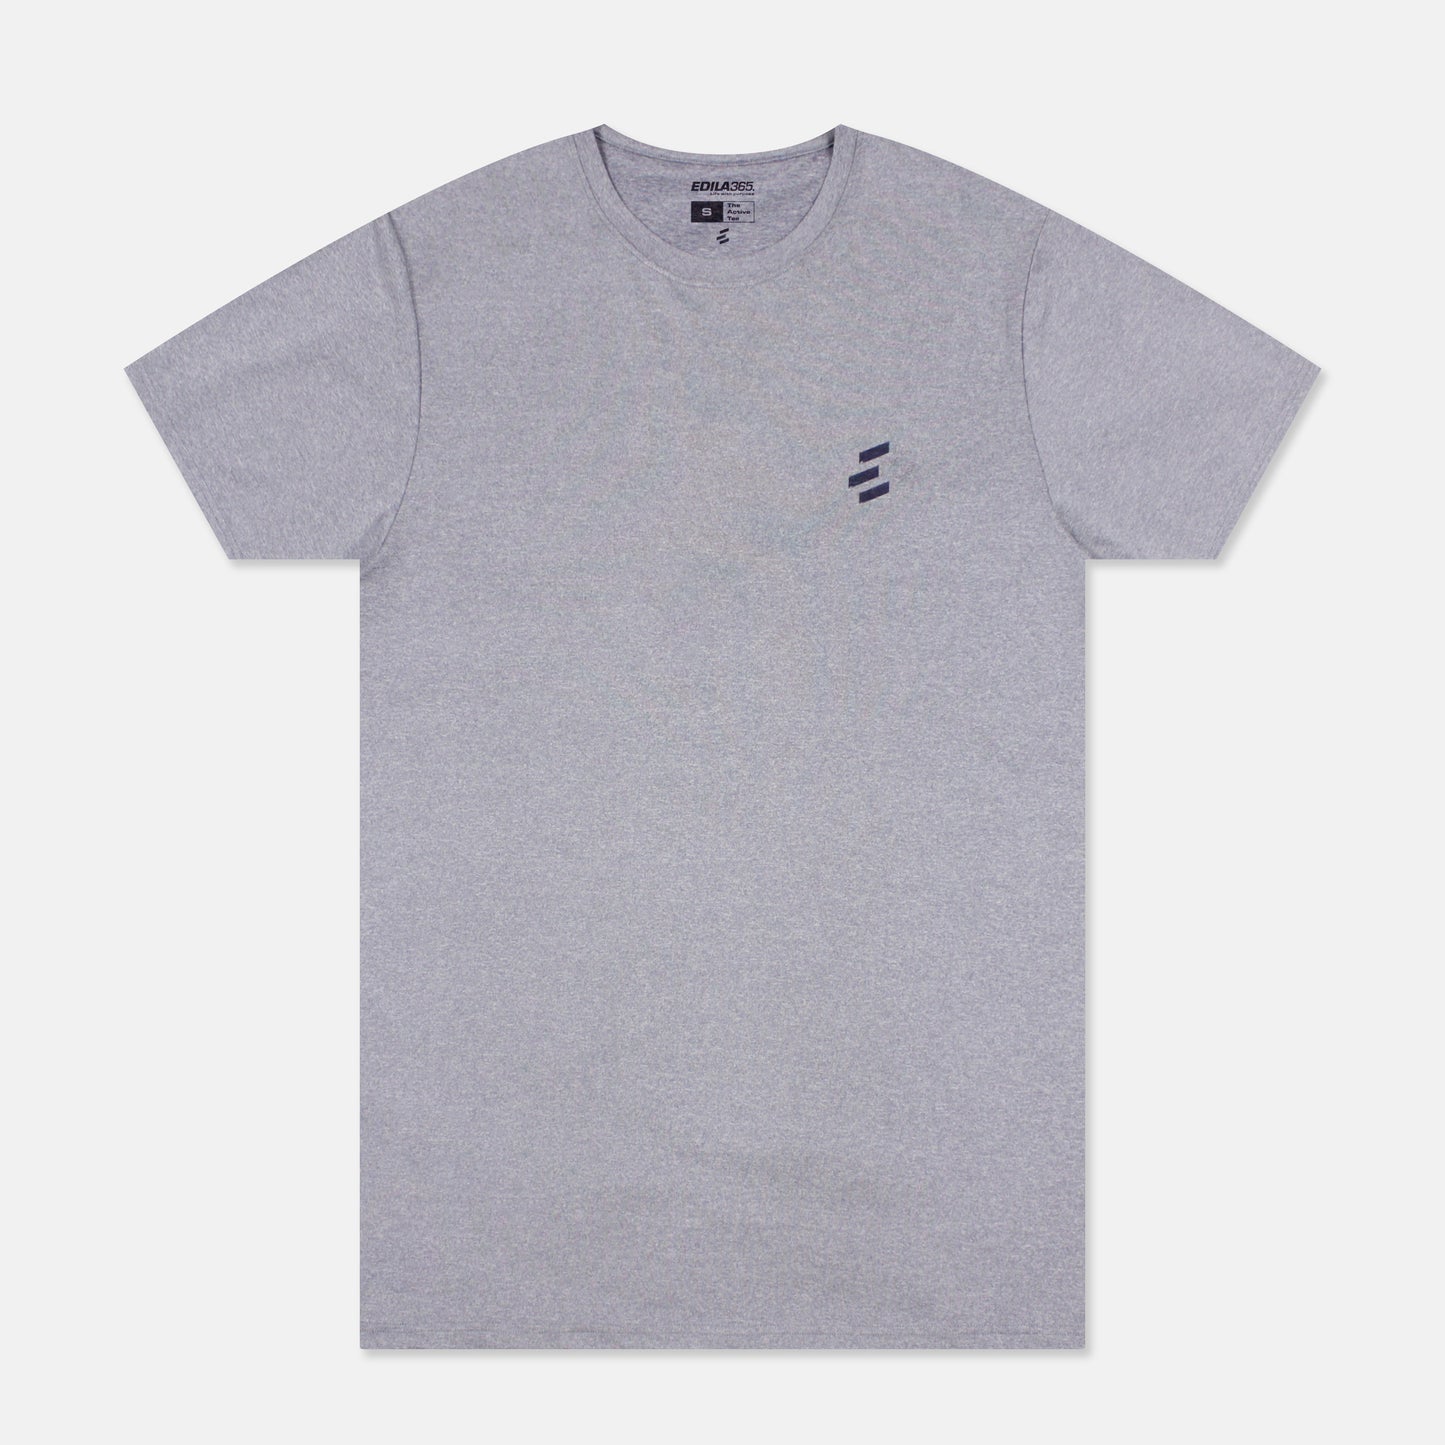 THE ACTIVE TEE